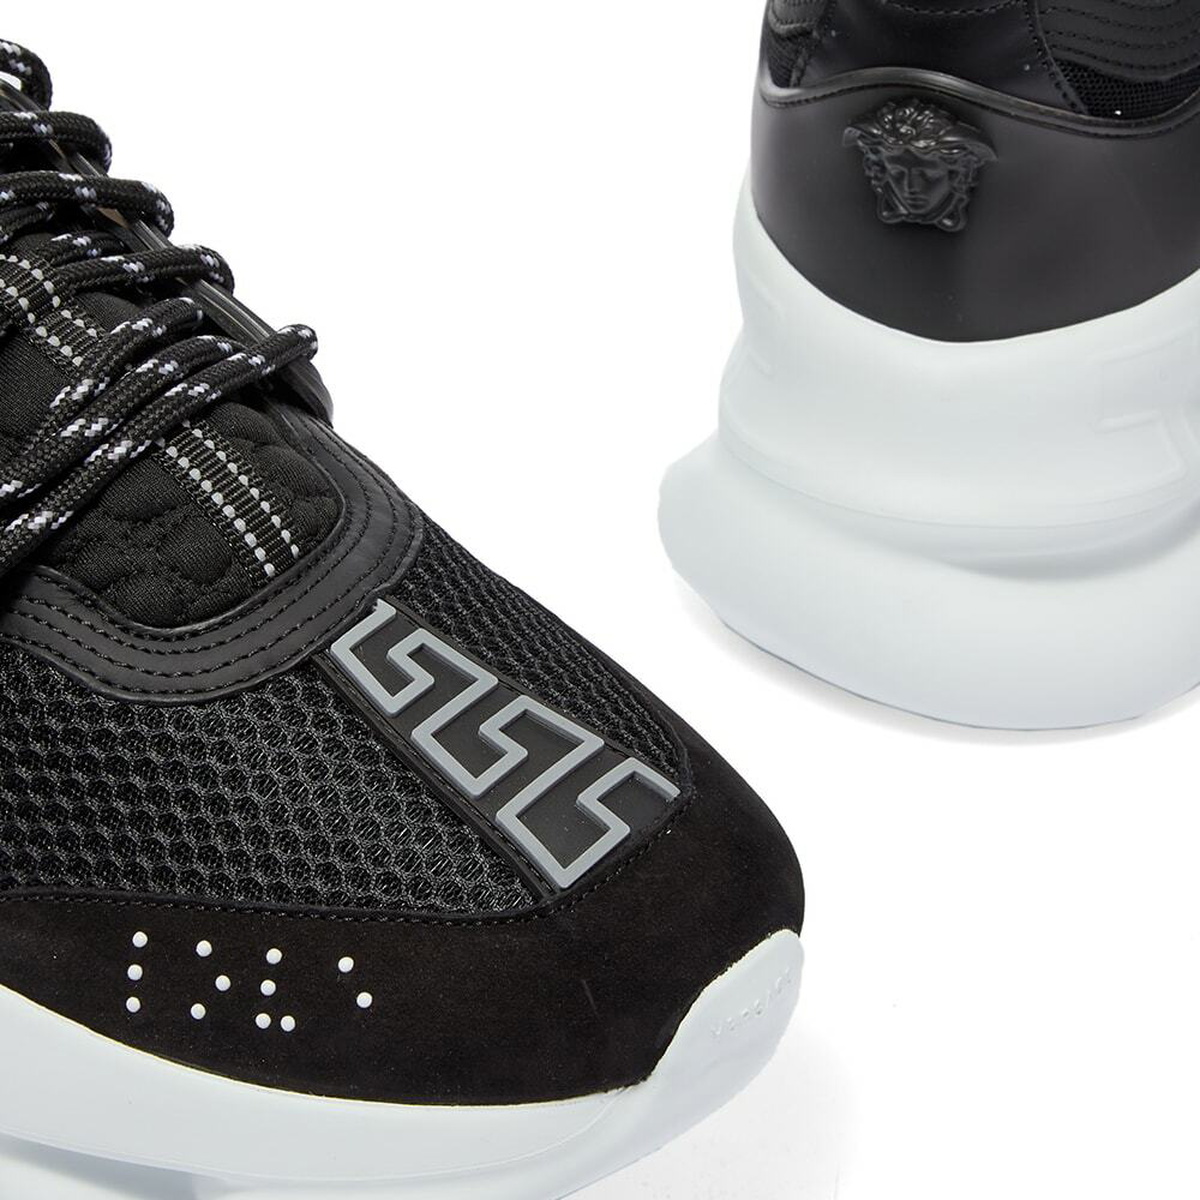 VERSACE: Chain Reaction sneakers in mesh and leather - Black